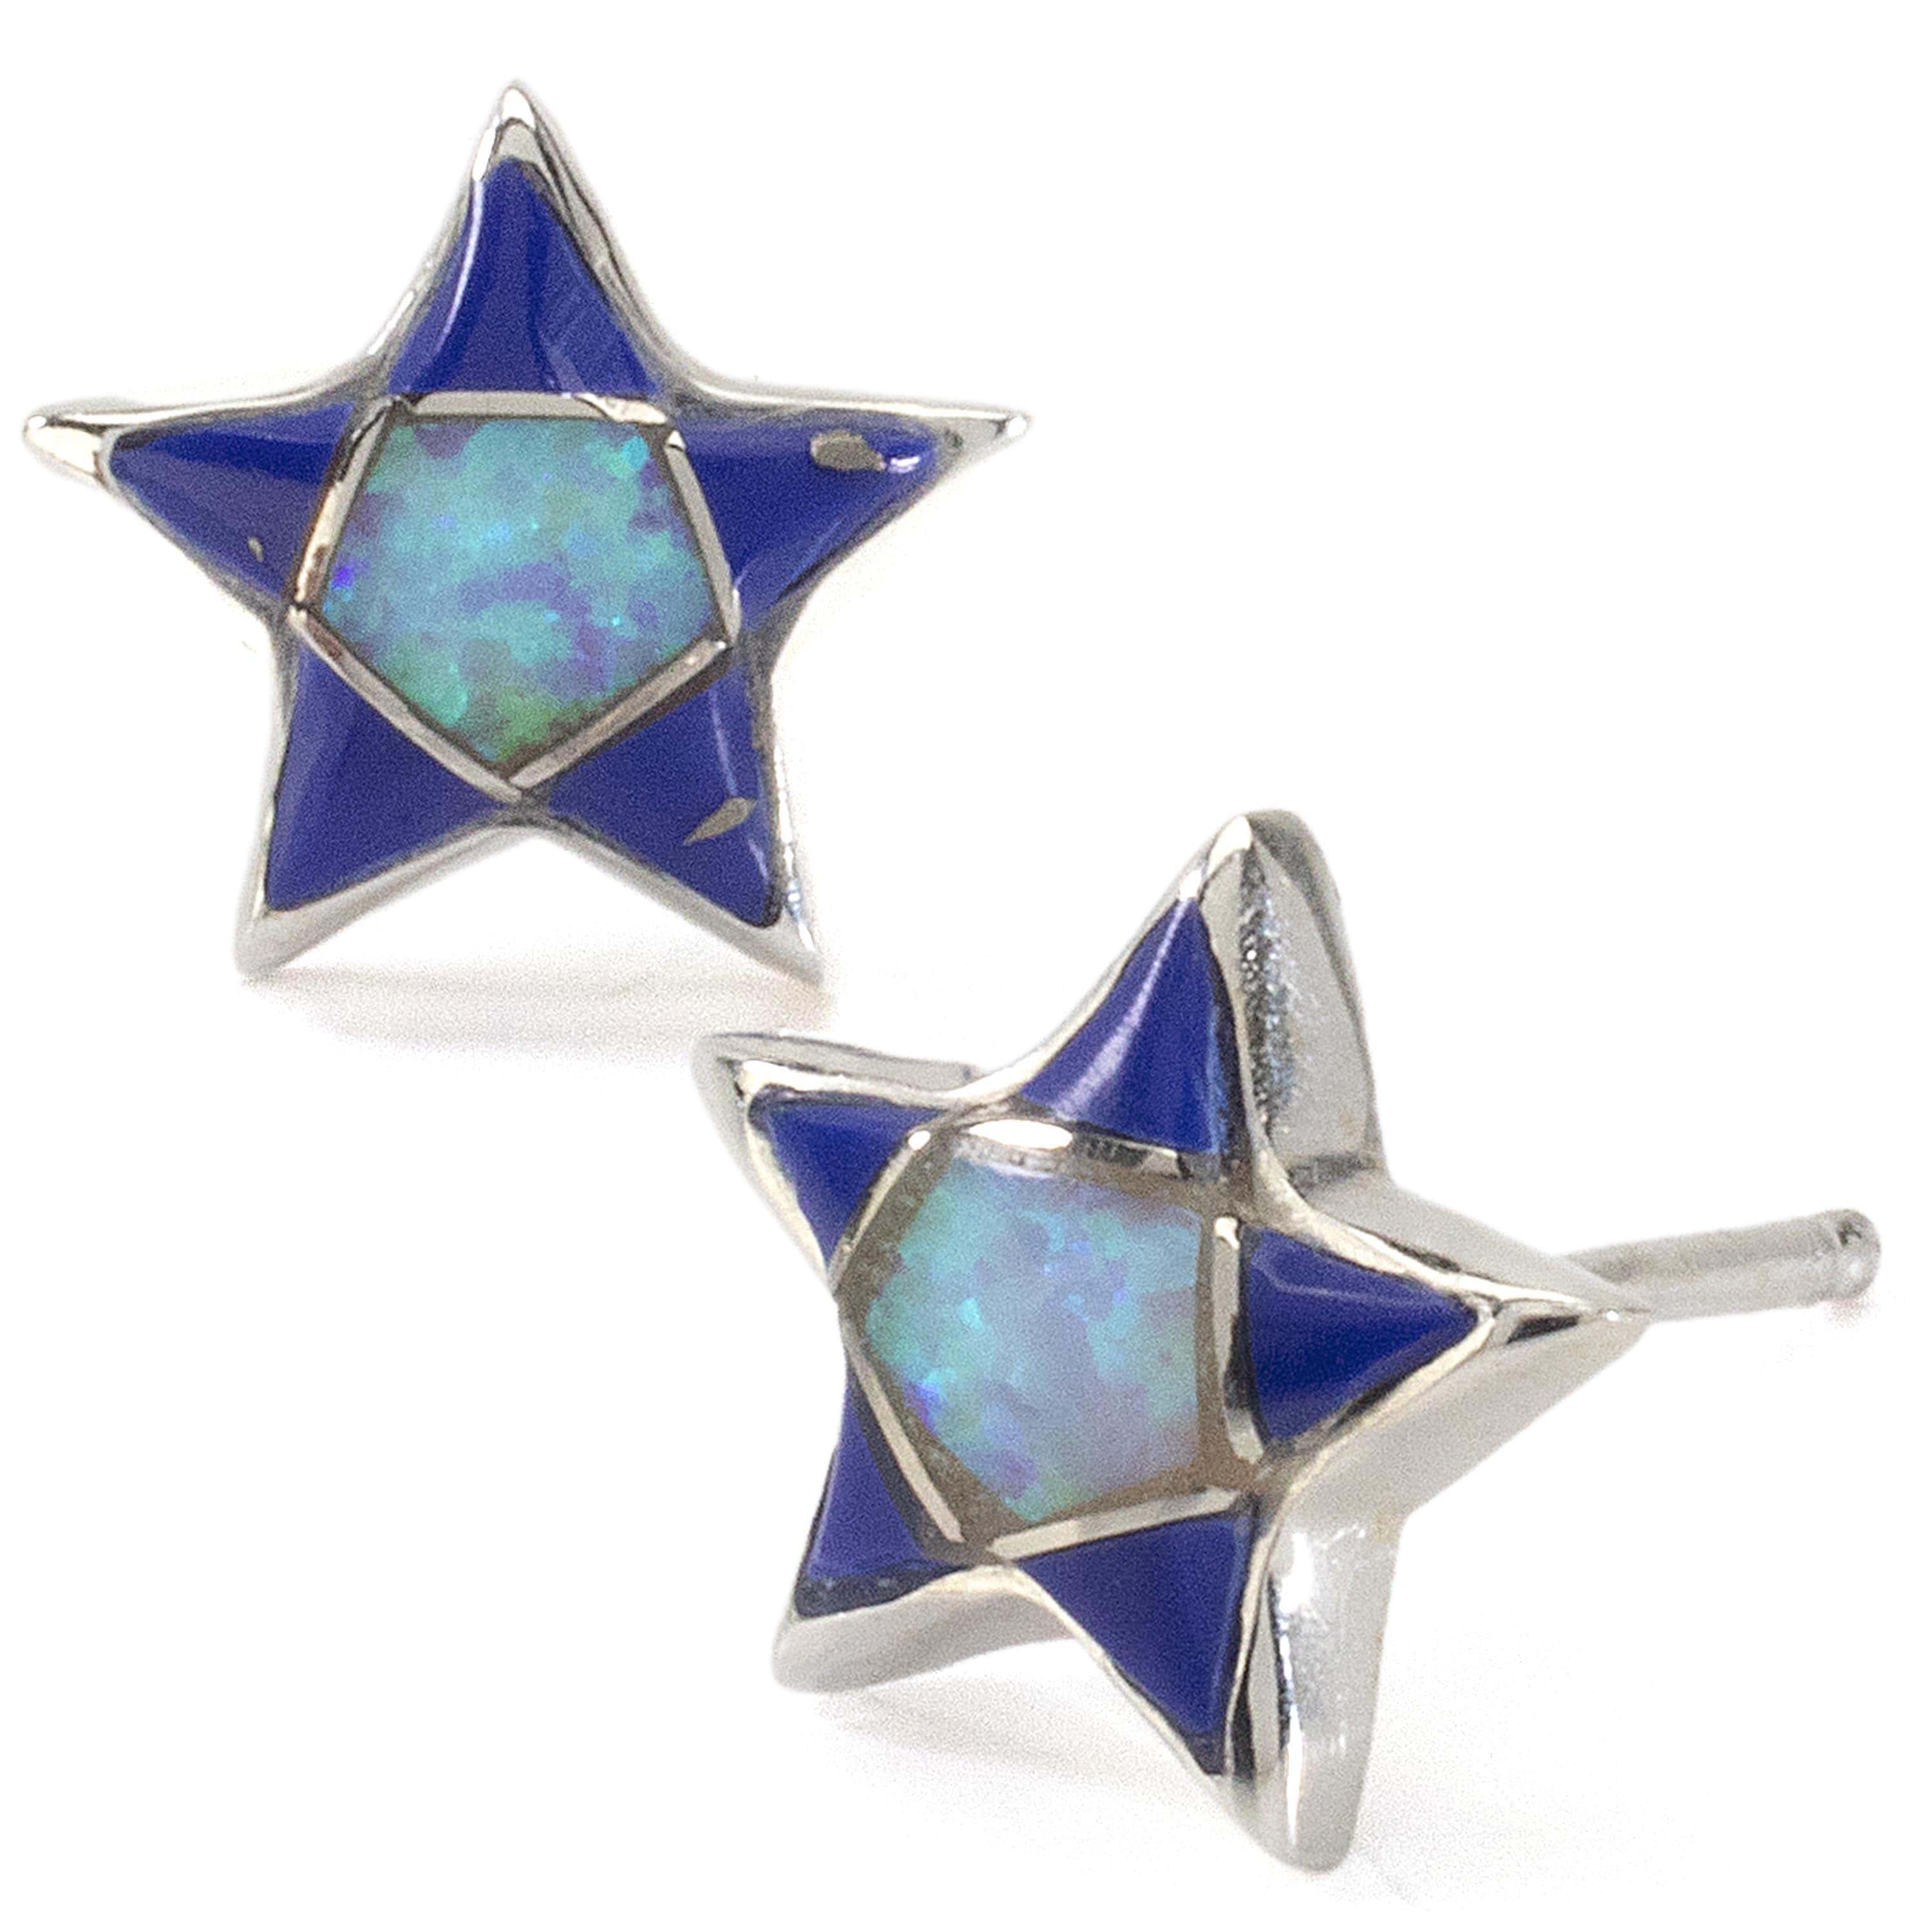 Kalifano Southwest Silver Jewelry Lapis Star Earrings Handmade with Sterling Silver and Opal Accent NME.2243.LP